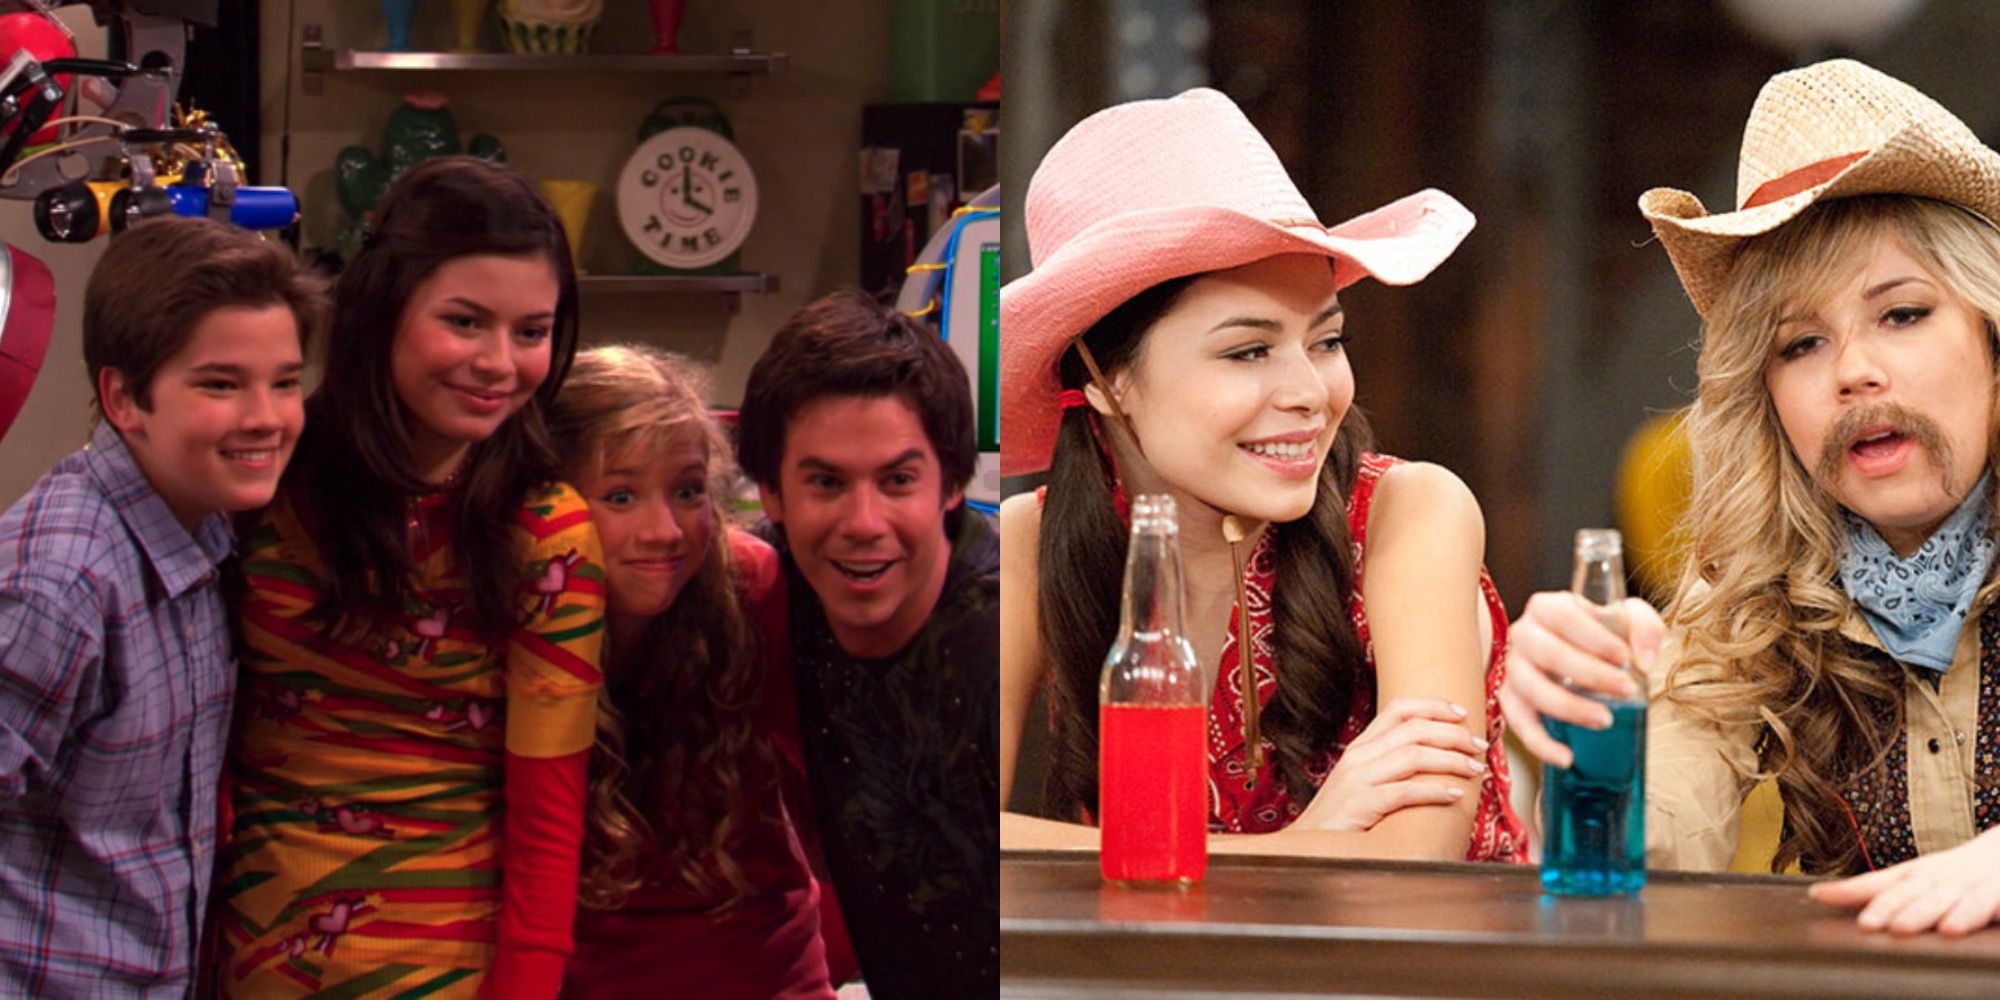 Split Promo Images Of Cast Of The Original iCarly